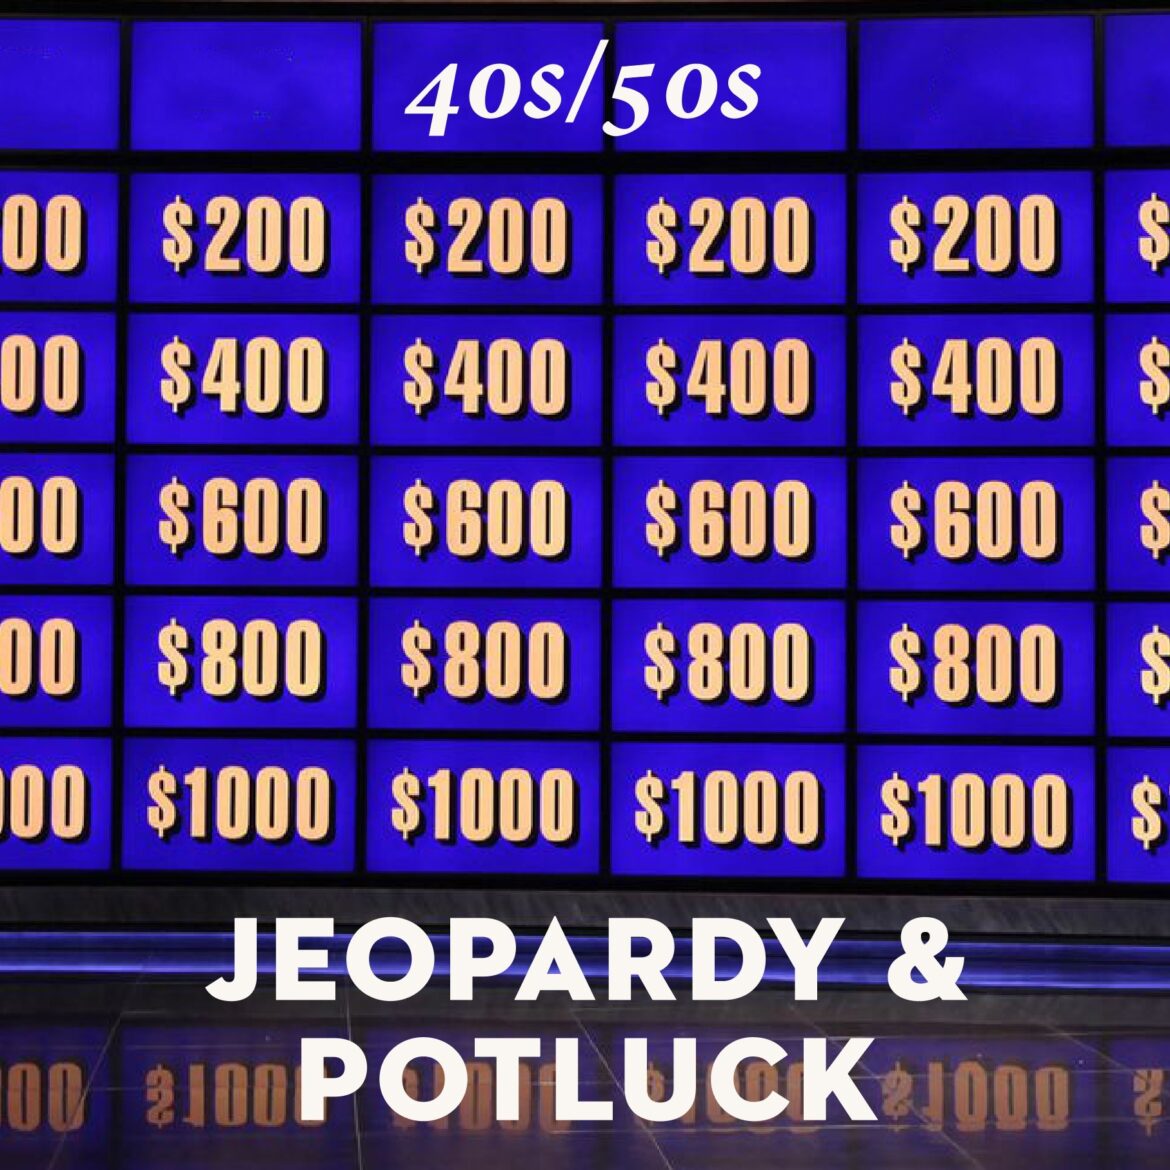 Jeopardy and Potluck in Bloedel Hall